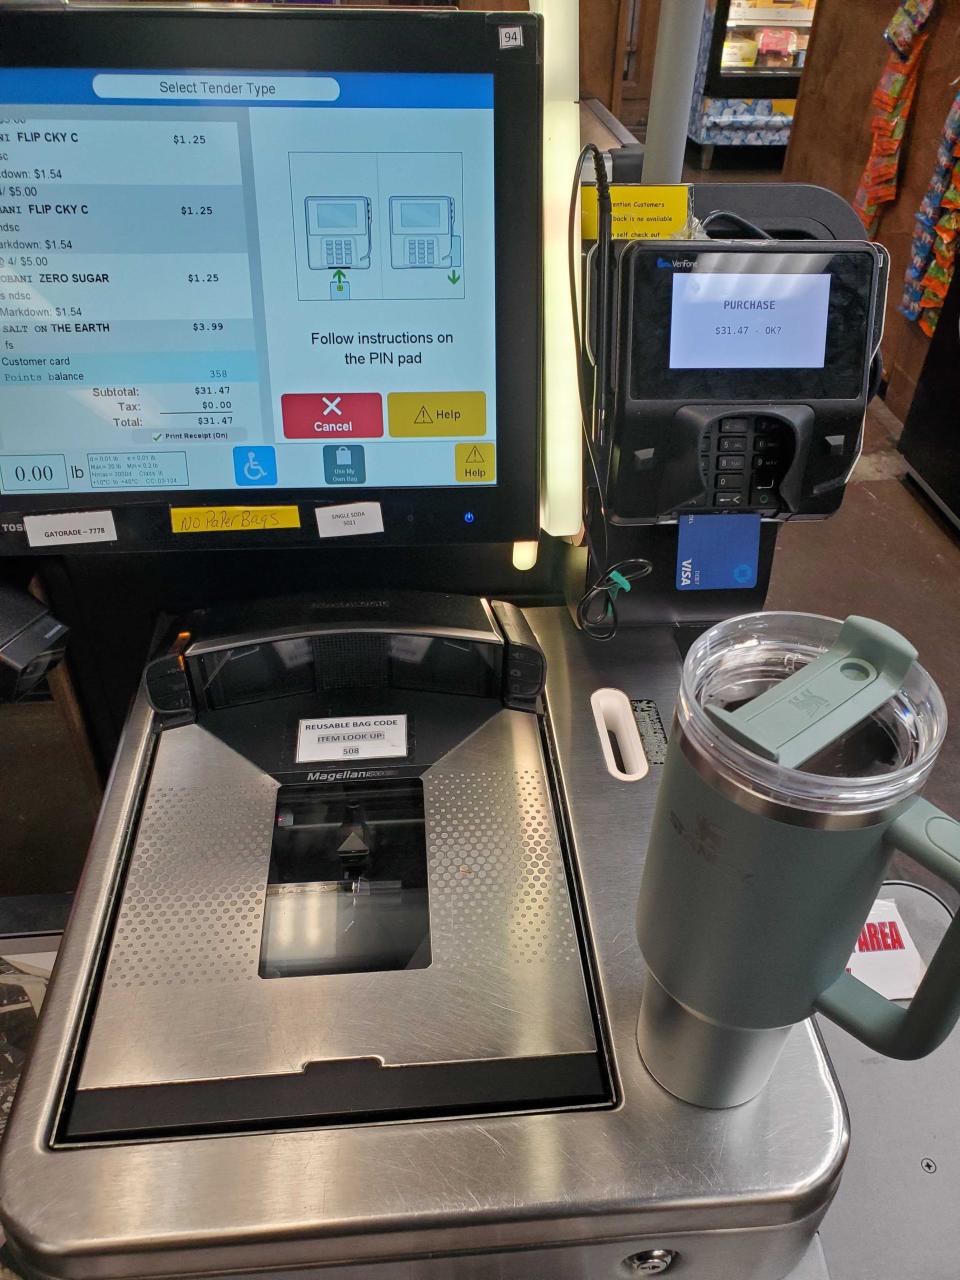 Teal Stanley cup sits next to a self-checkout station inside a convenience store.